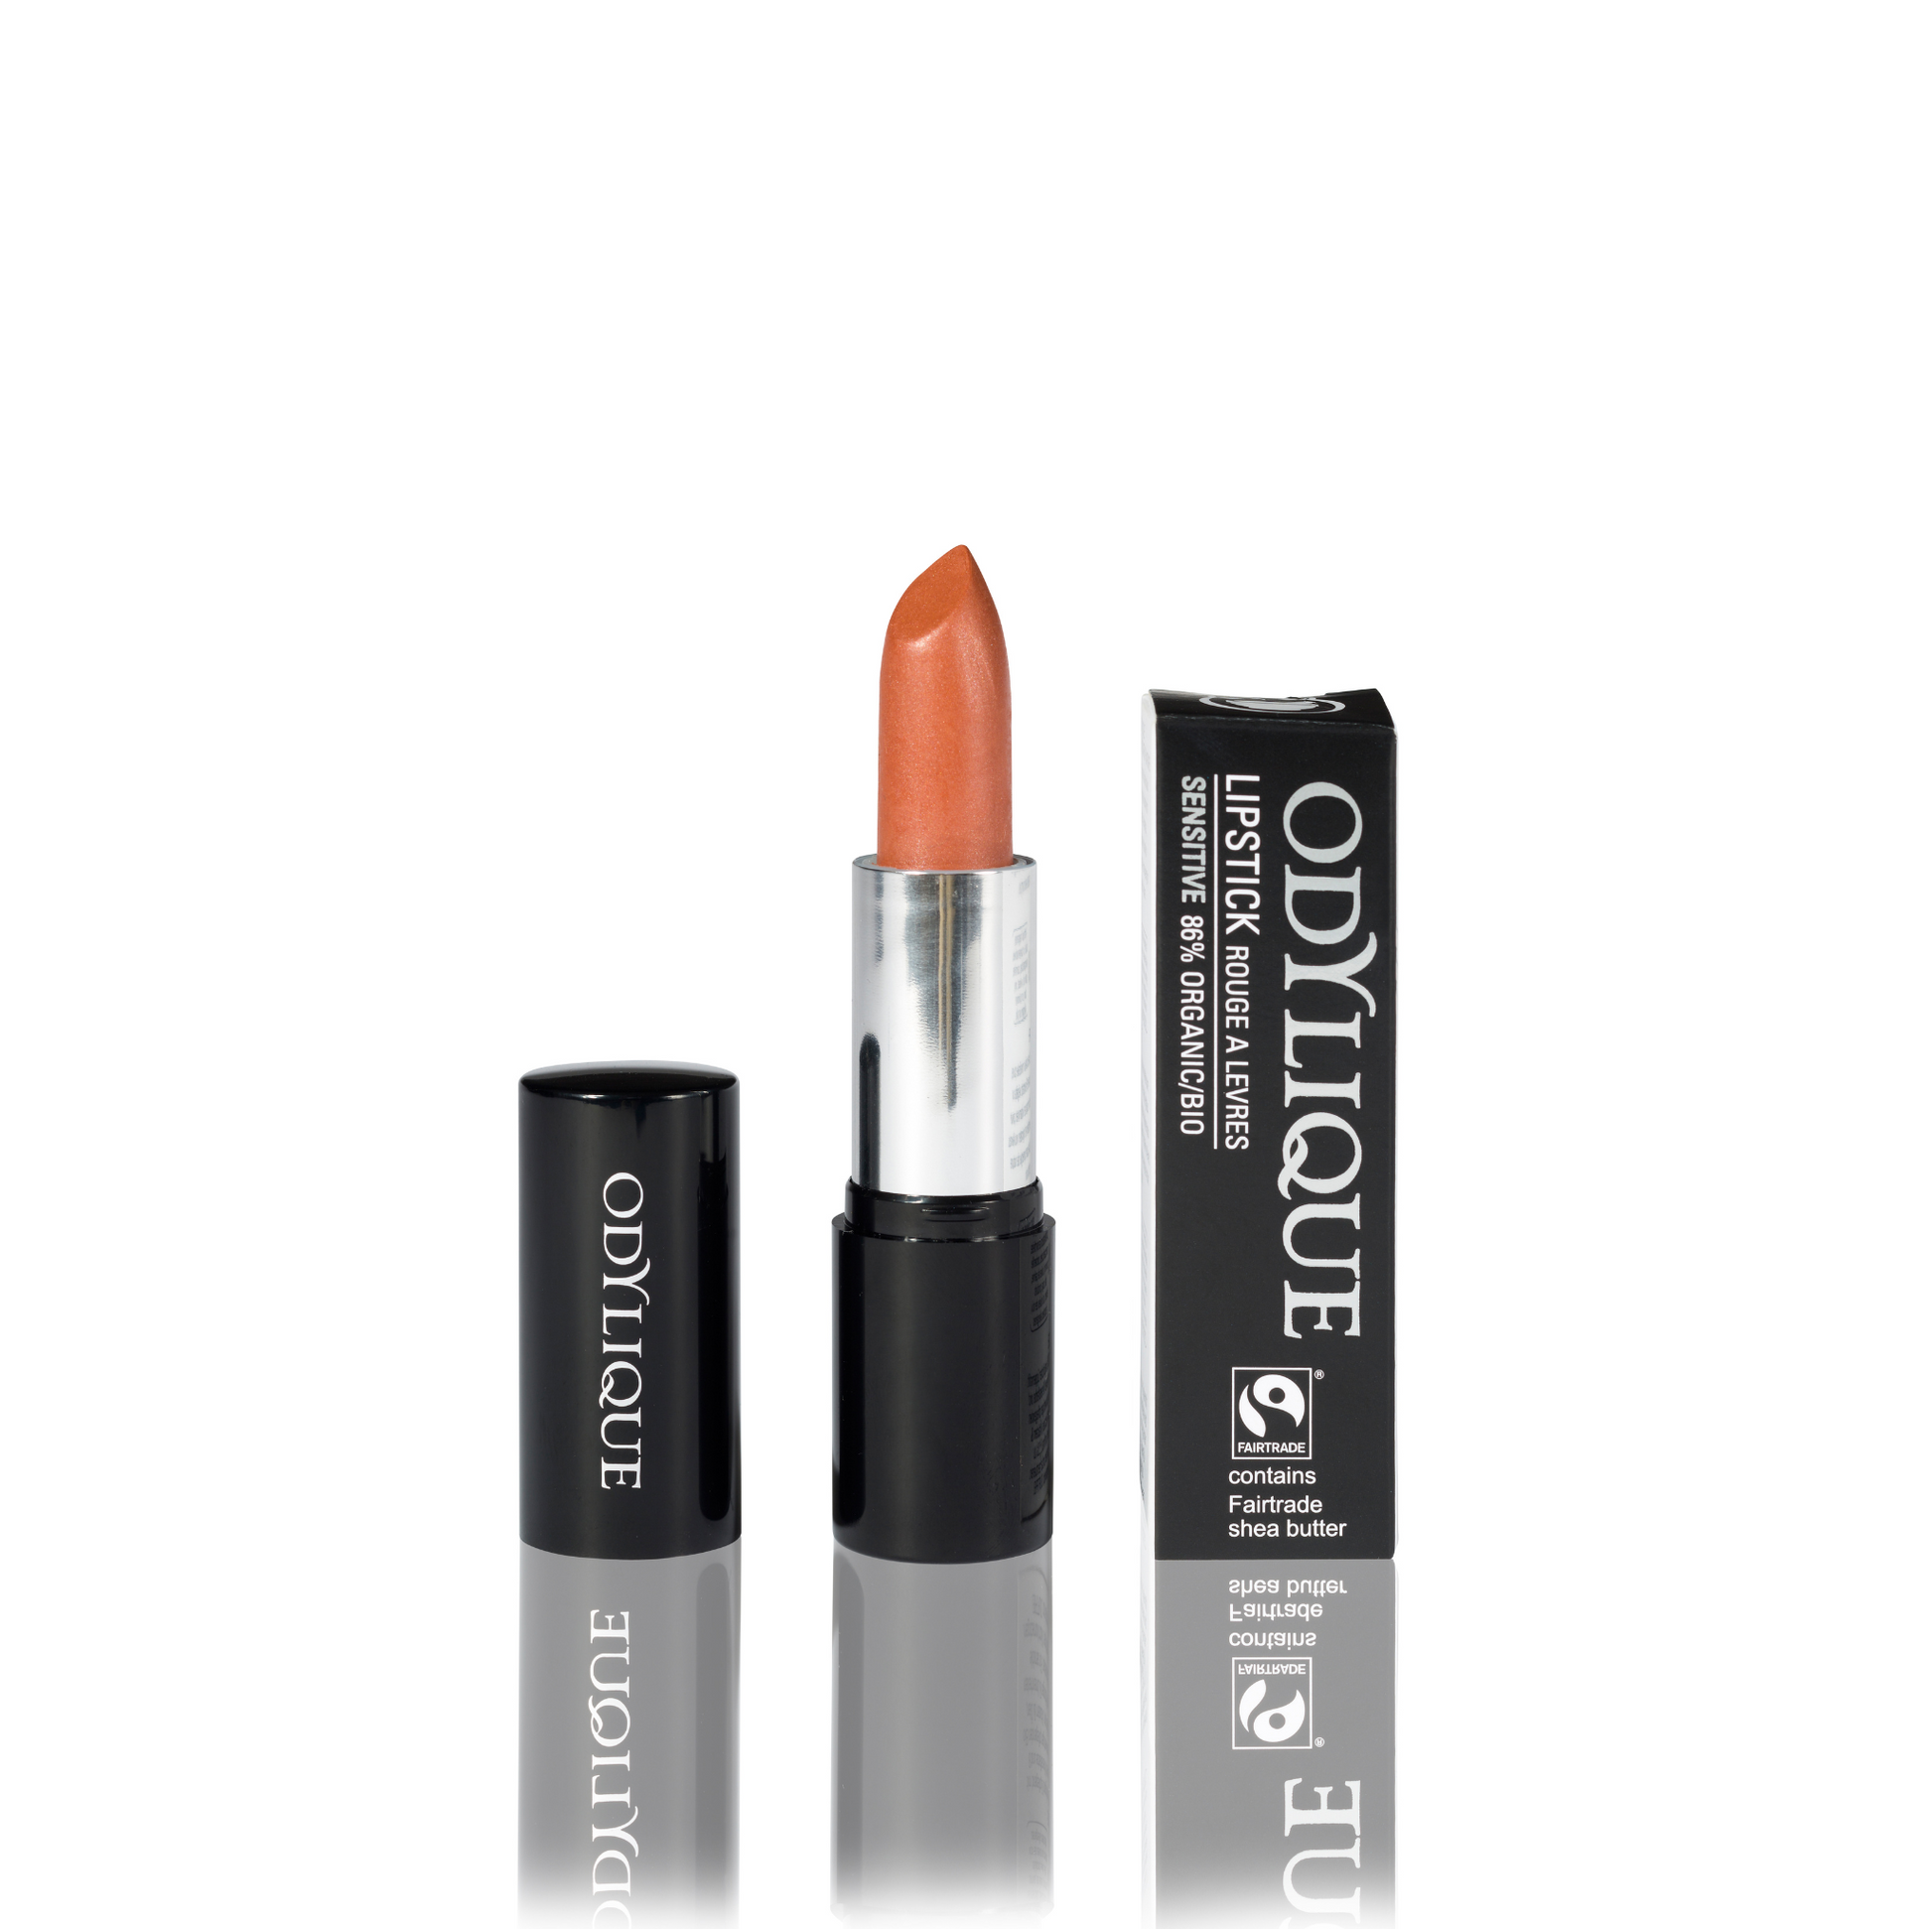 Odylique lipstick in apricot sorbet (orange) partially twisted up from its black tube, positioned next to its packaging on a reflective surface.